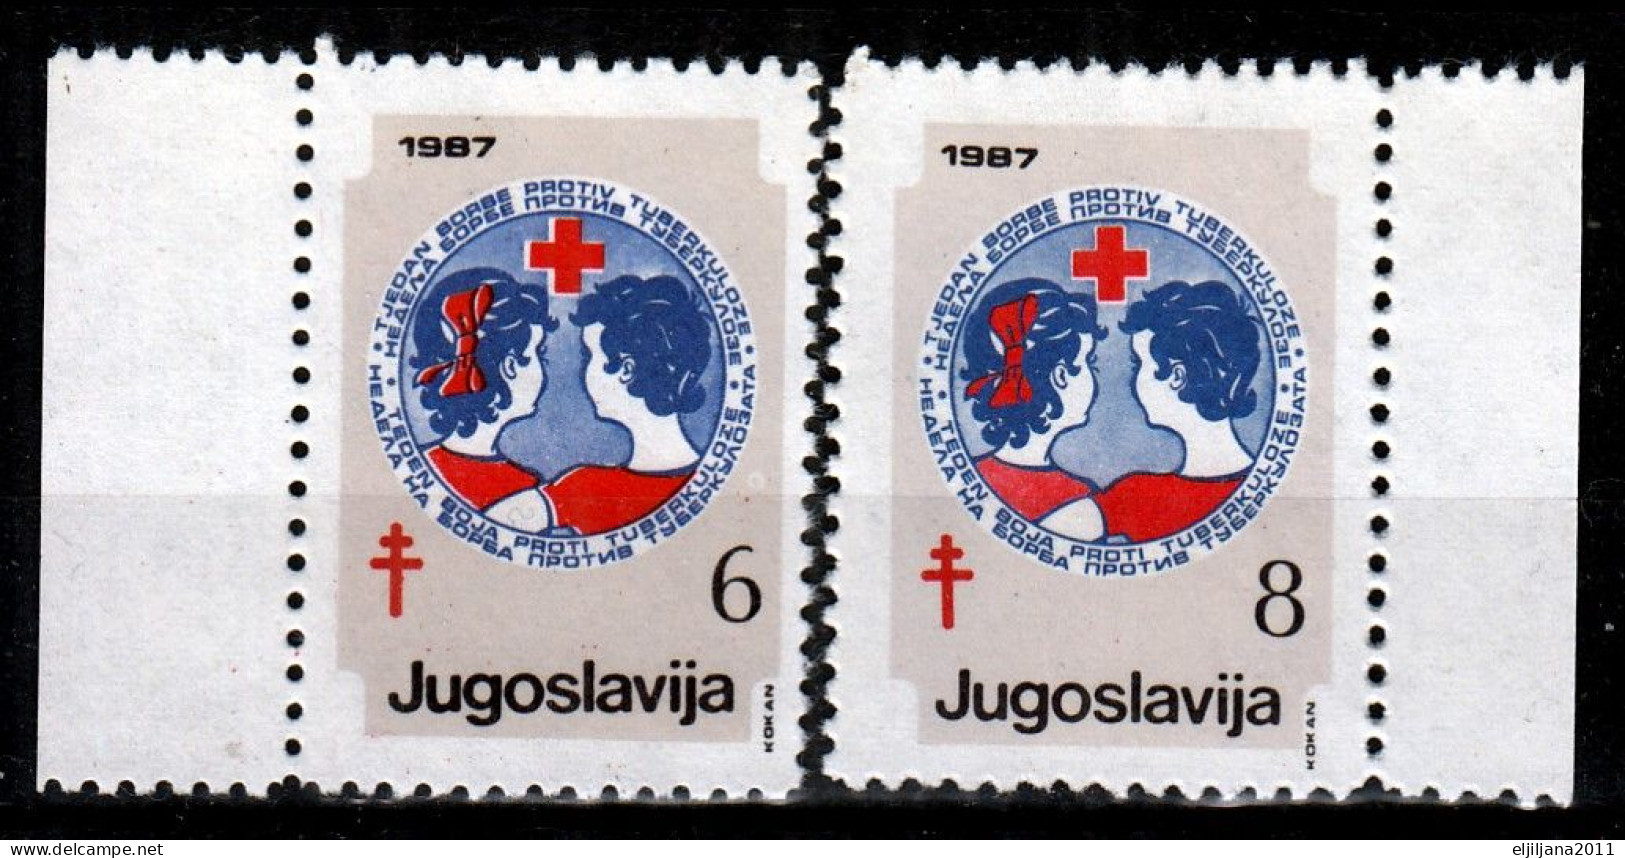 ⁕ Yugoslavia 1987 ⁕ Red Cross / Fight Against Tuberculosis 6 & 8 Din. Mi.126, 128 ⁕ 2v Unused - Charity Issues